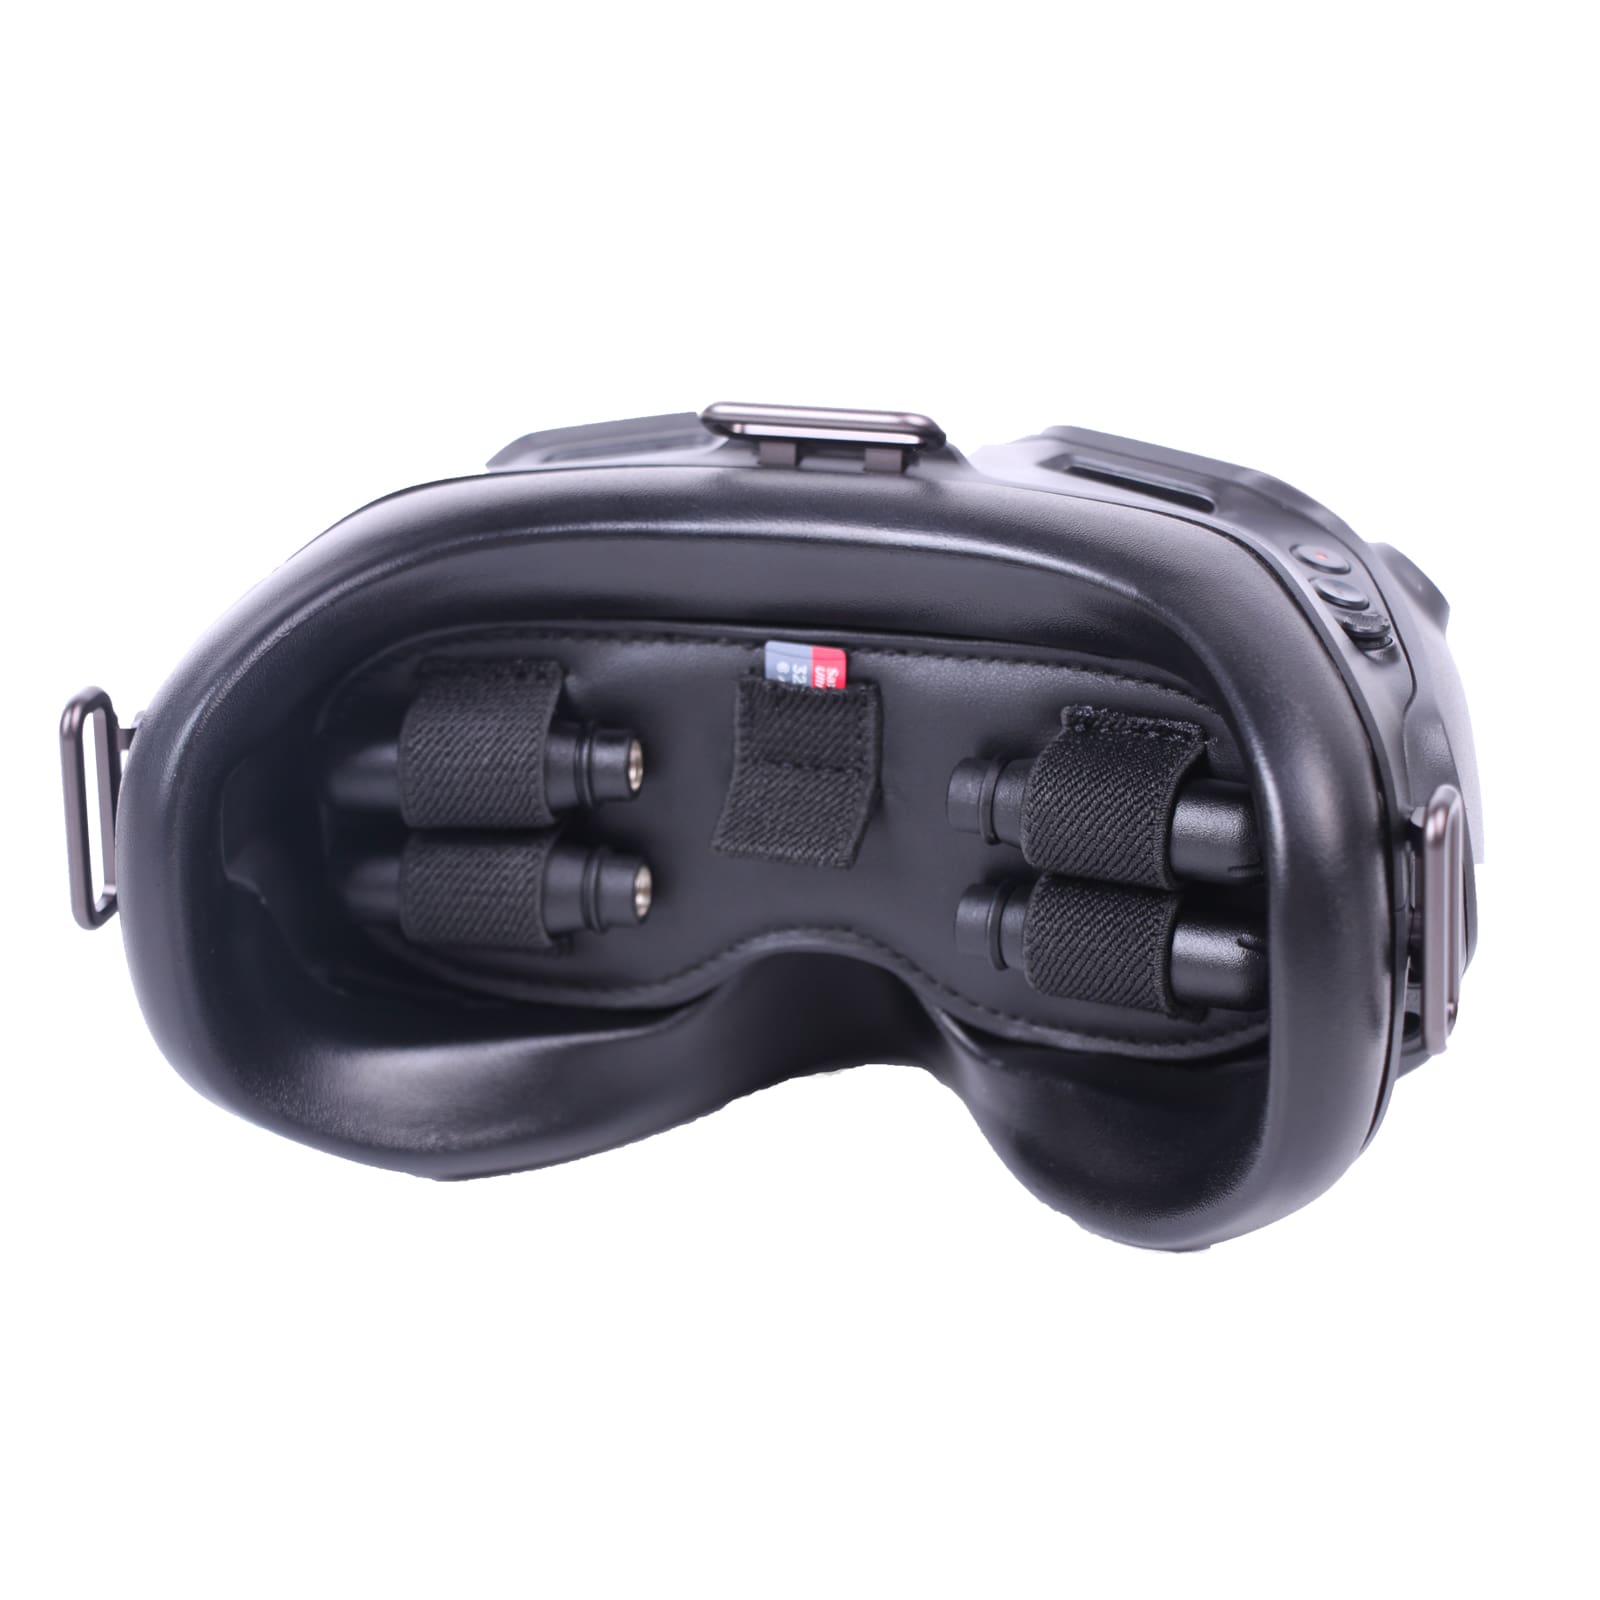  Arzroic DJI Avata FPV Accessories Battery Holder Case for DJI  Goggles 2/FPV Goggles V2 : Toys & Games